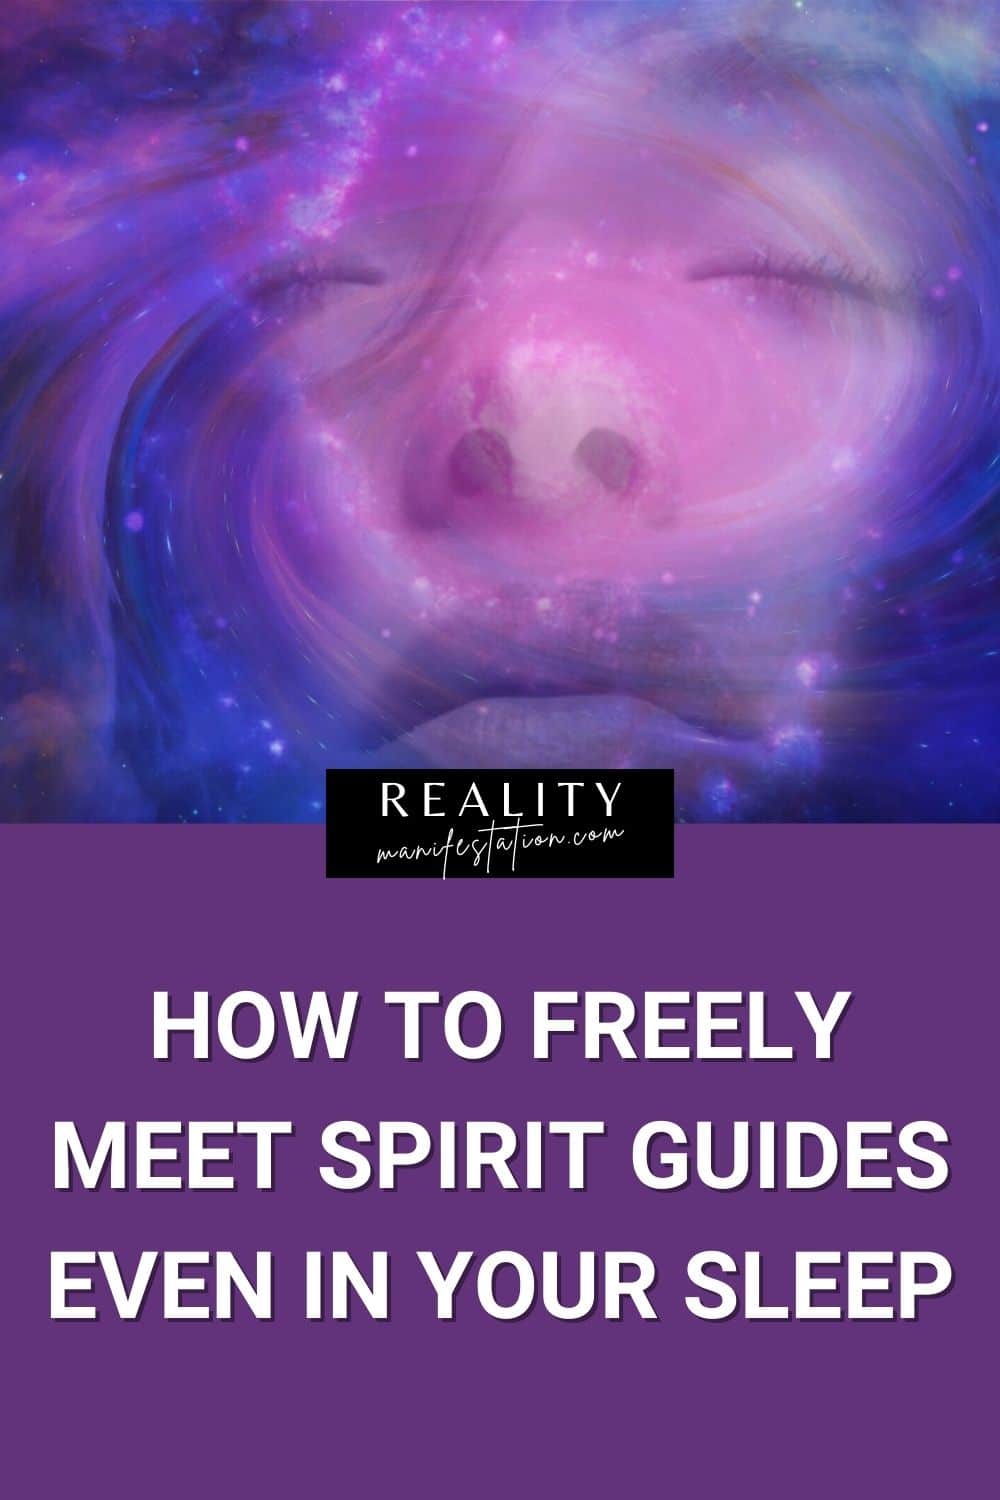 Face mixed in with a purple swirling universe with text below saying How To Freely Meet Spirit Guides Even In Your Sleep